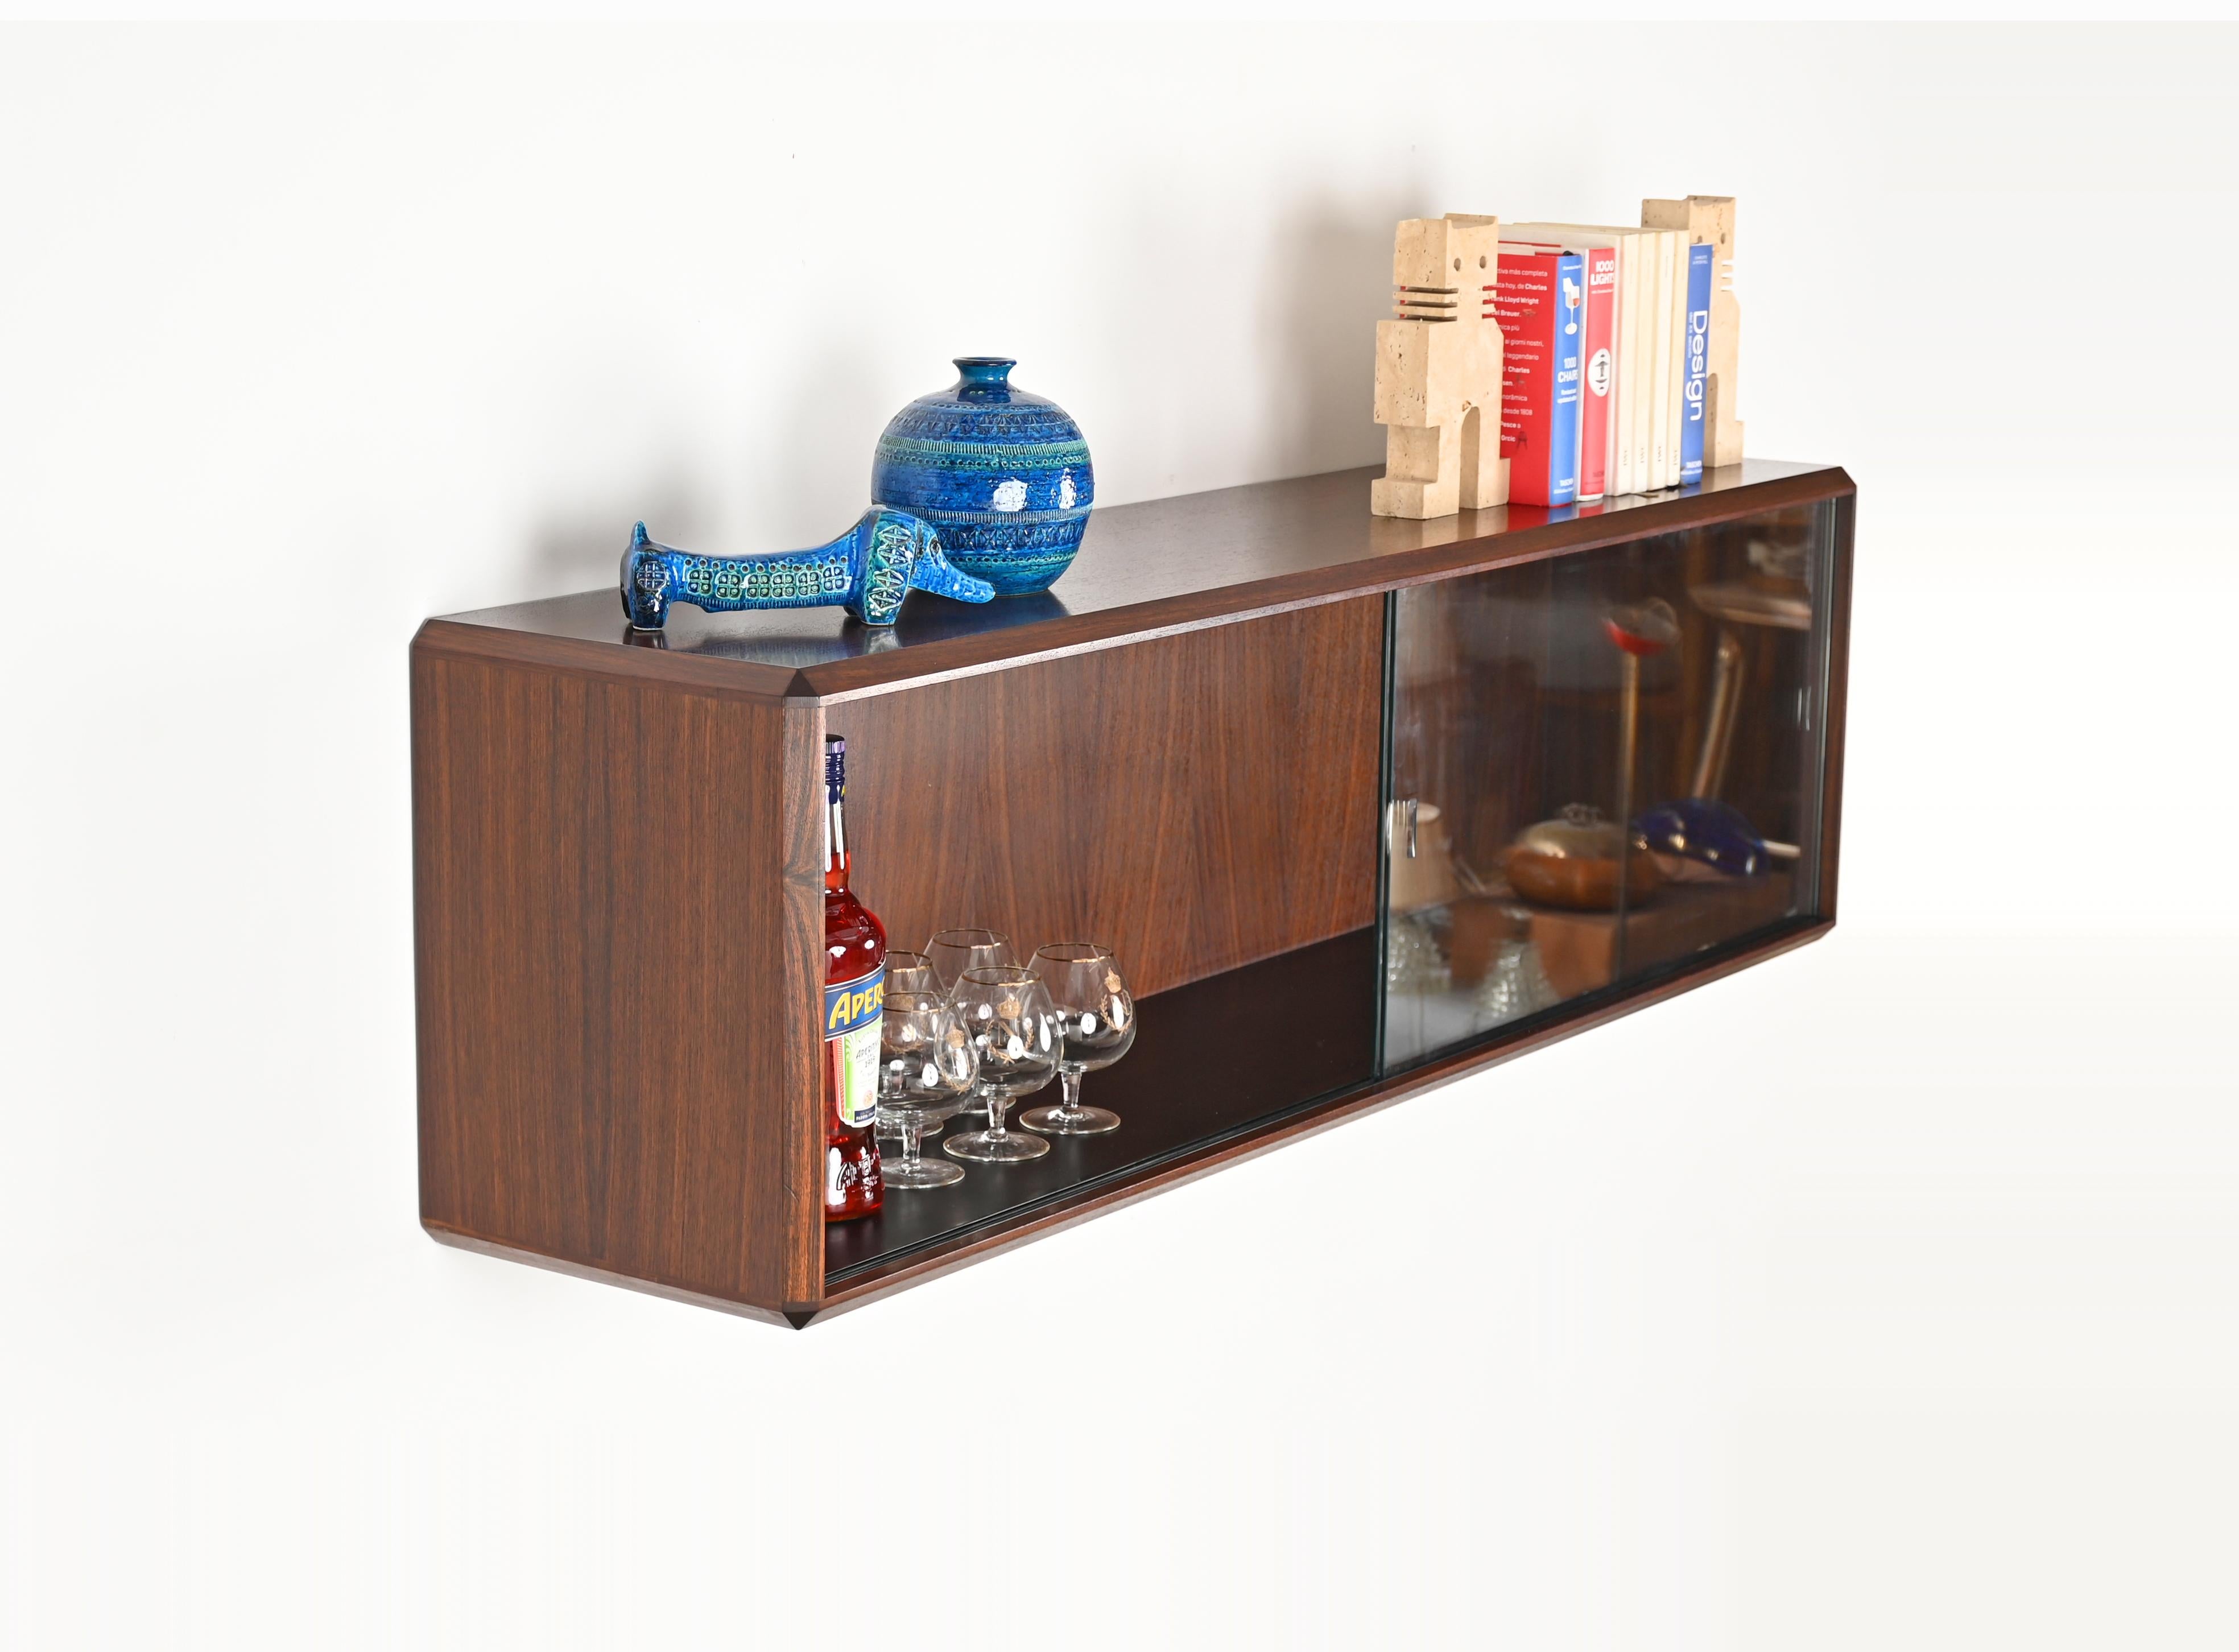 Hand-Crafted Dino Cavalli Italian Showcase or Wall Shelf, Wood and Sliding Glass, Italy 1970s For Sale